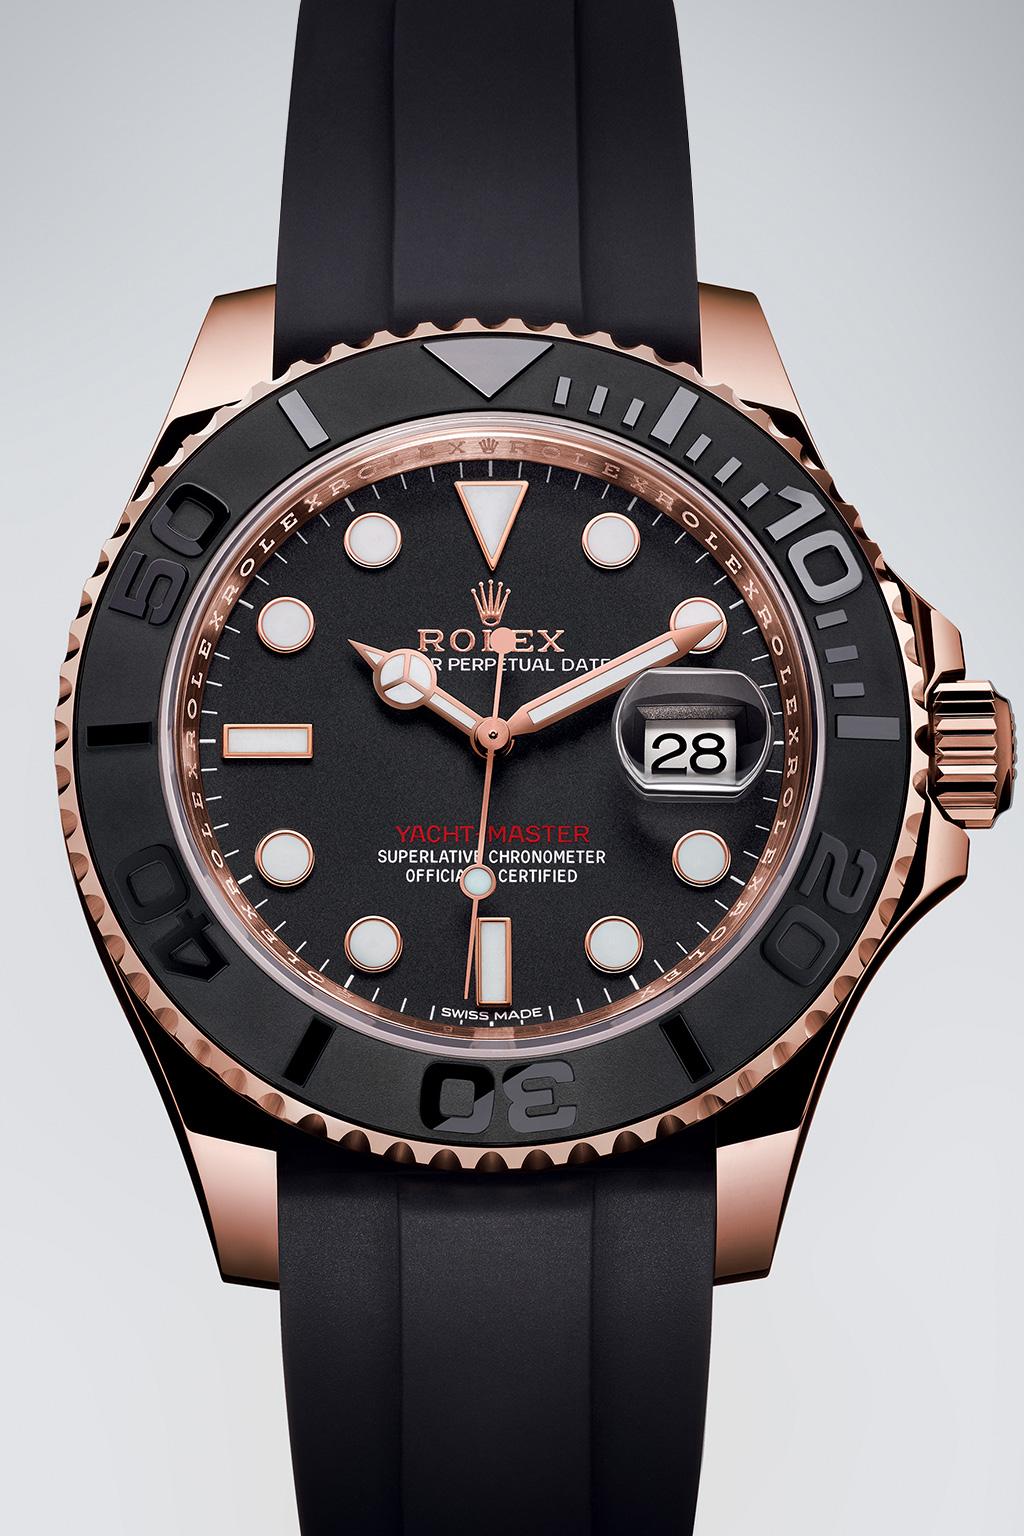 Style of the Yacht-Master 40 THE WATCH OF THE OPEN SEAS The Yacht-Master is revered for its casual yet purposeful allure.